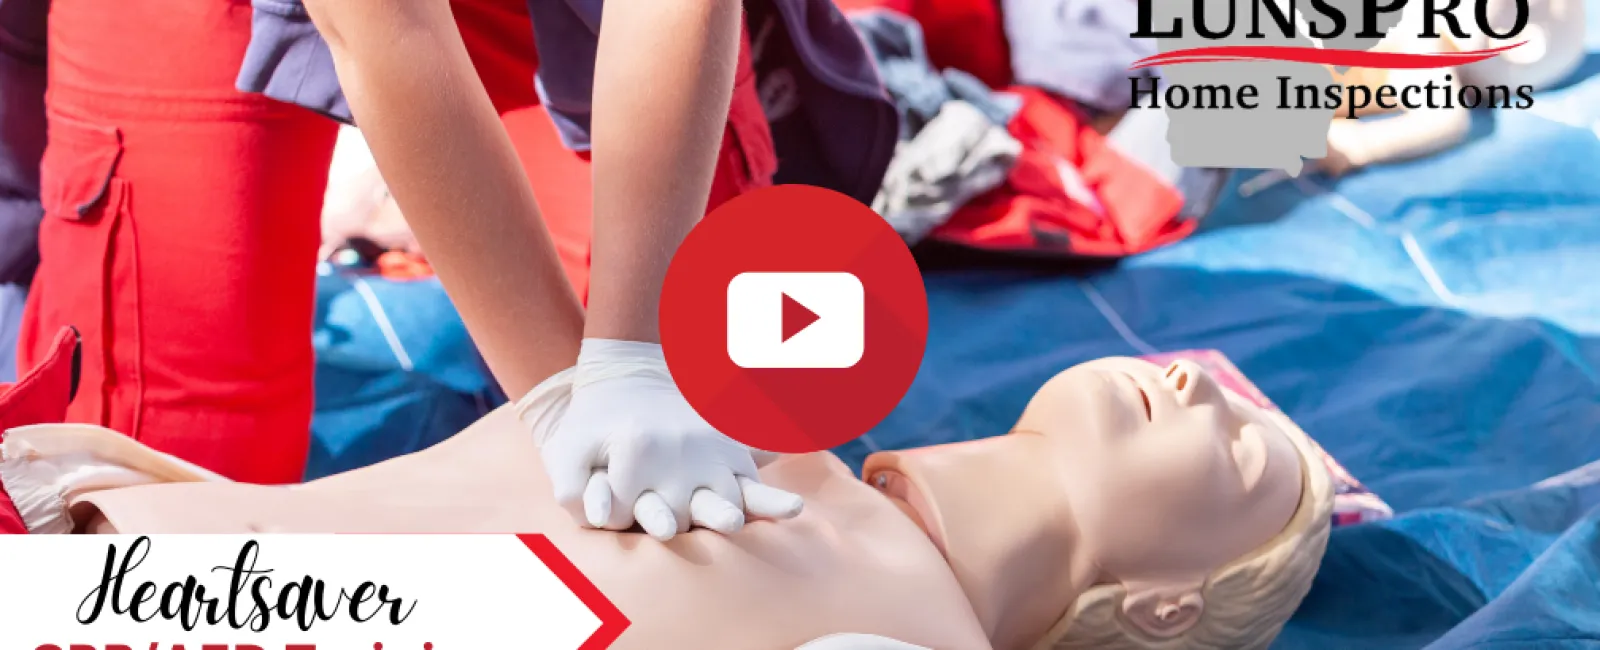 Heartsaver CPR/AED Training class provided for real estate agents